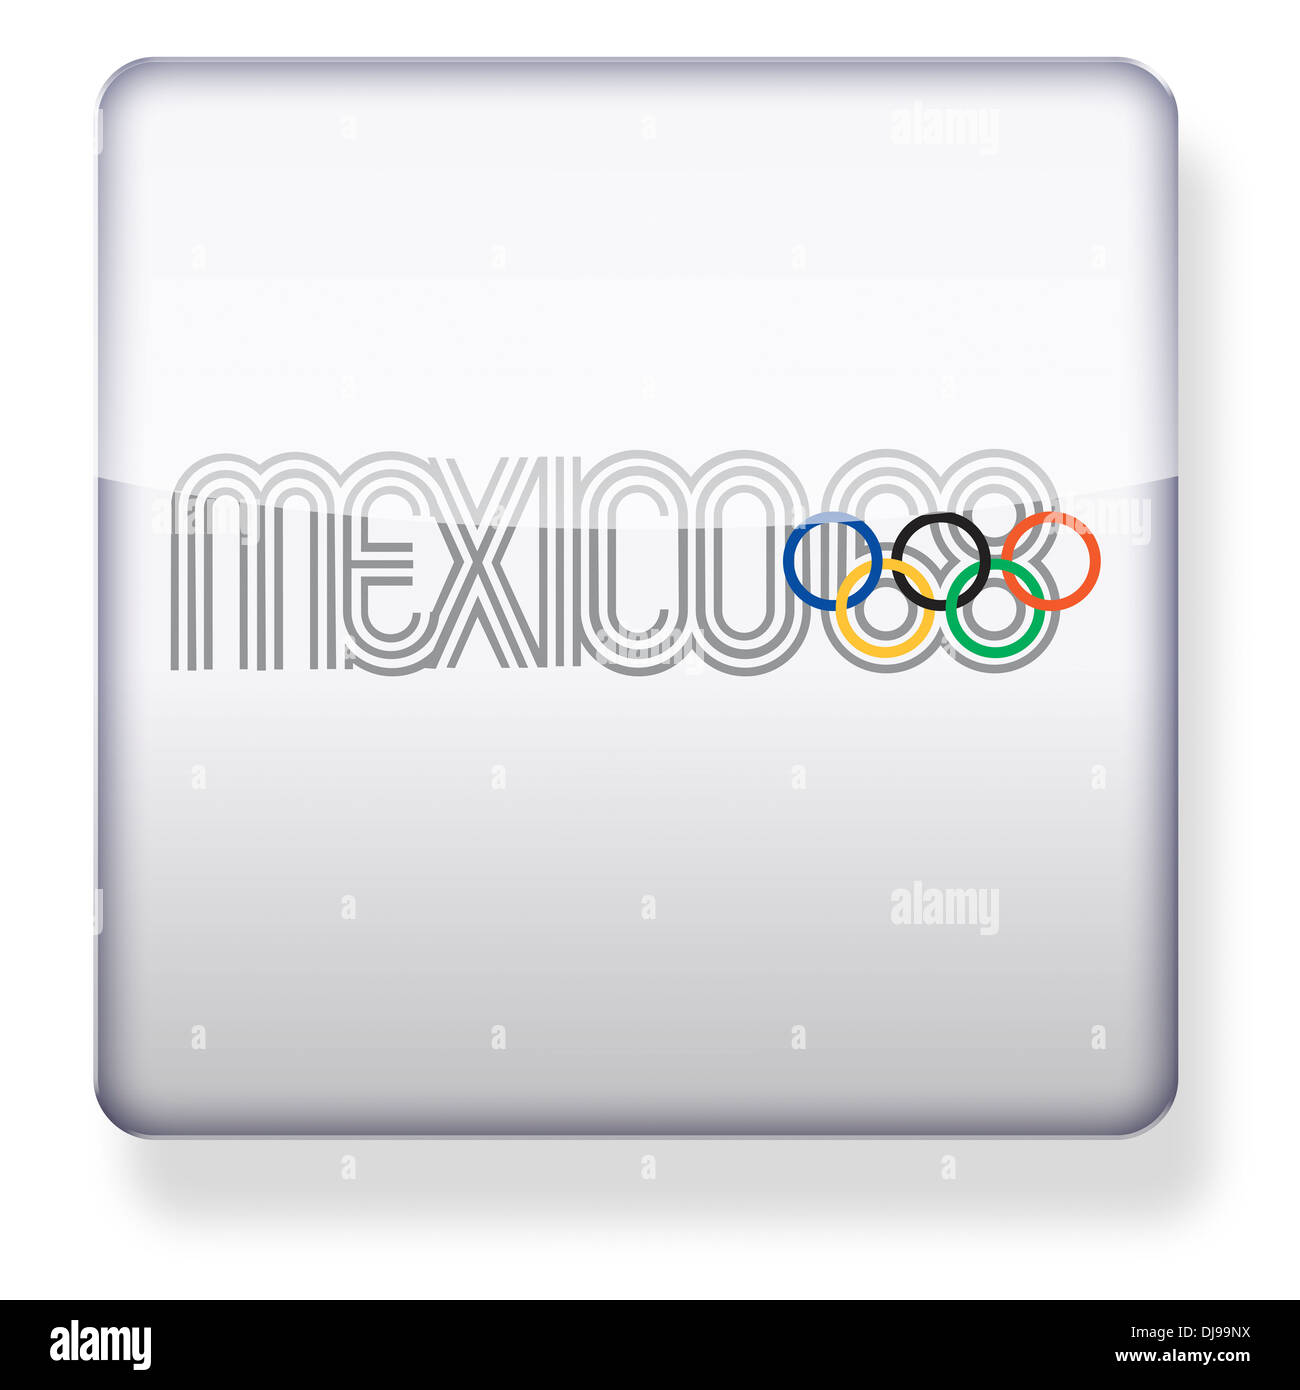 Mexico 1968 Olympics logo as an app icon. Clipping path included. Stock Photo